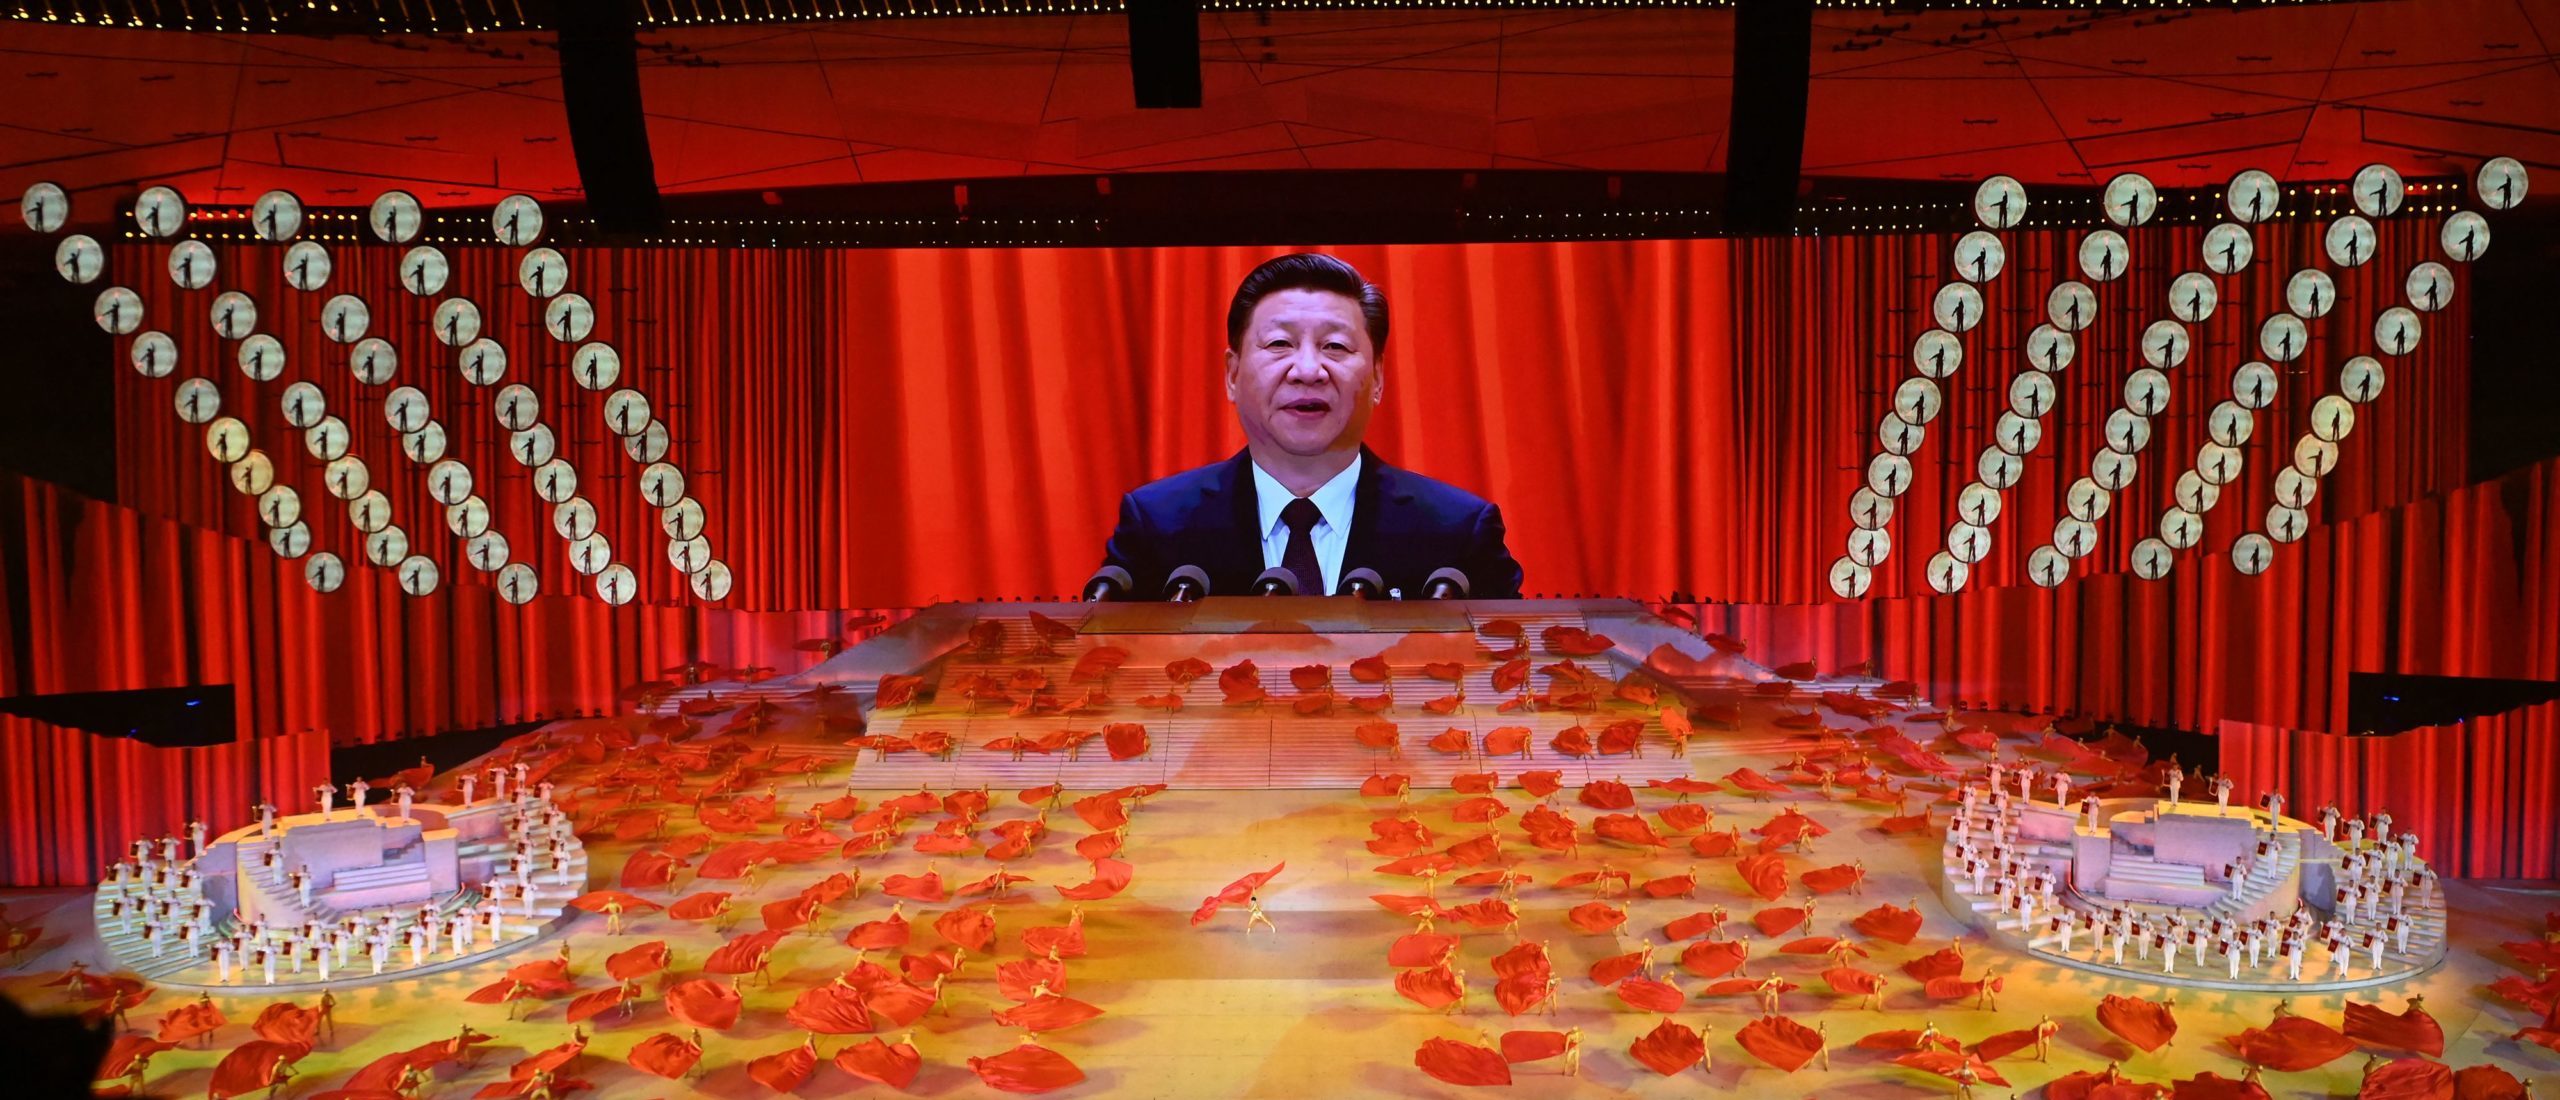 A picture of Chinese President Xi Jinping is seen on a large screen during a Cultural Performance as part of the celebration of the 100th Anniversary of the Founding of the Communist Party of China, at the Bird's nest national stadium in Beijing on June 28, 2021. (Photo by NOEL CELIS/AFP via Getty Images)